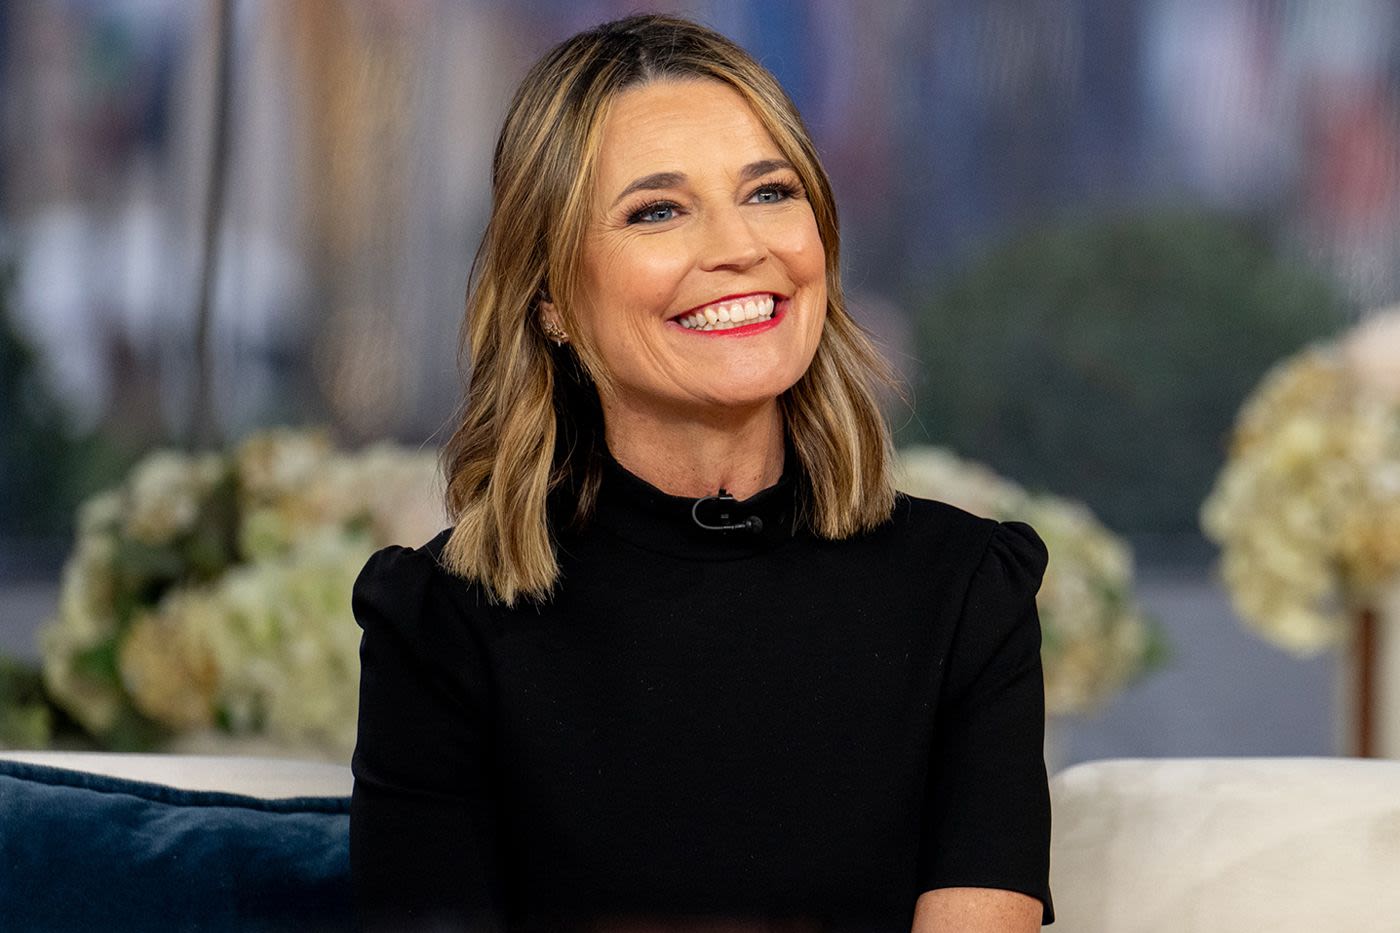 Savannah Guthrie Recalls How She 'Lost a Tooth' on “Today” Show Moms' 'Fun' Night Out (Exclusive)